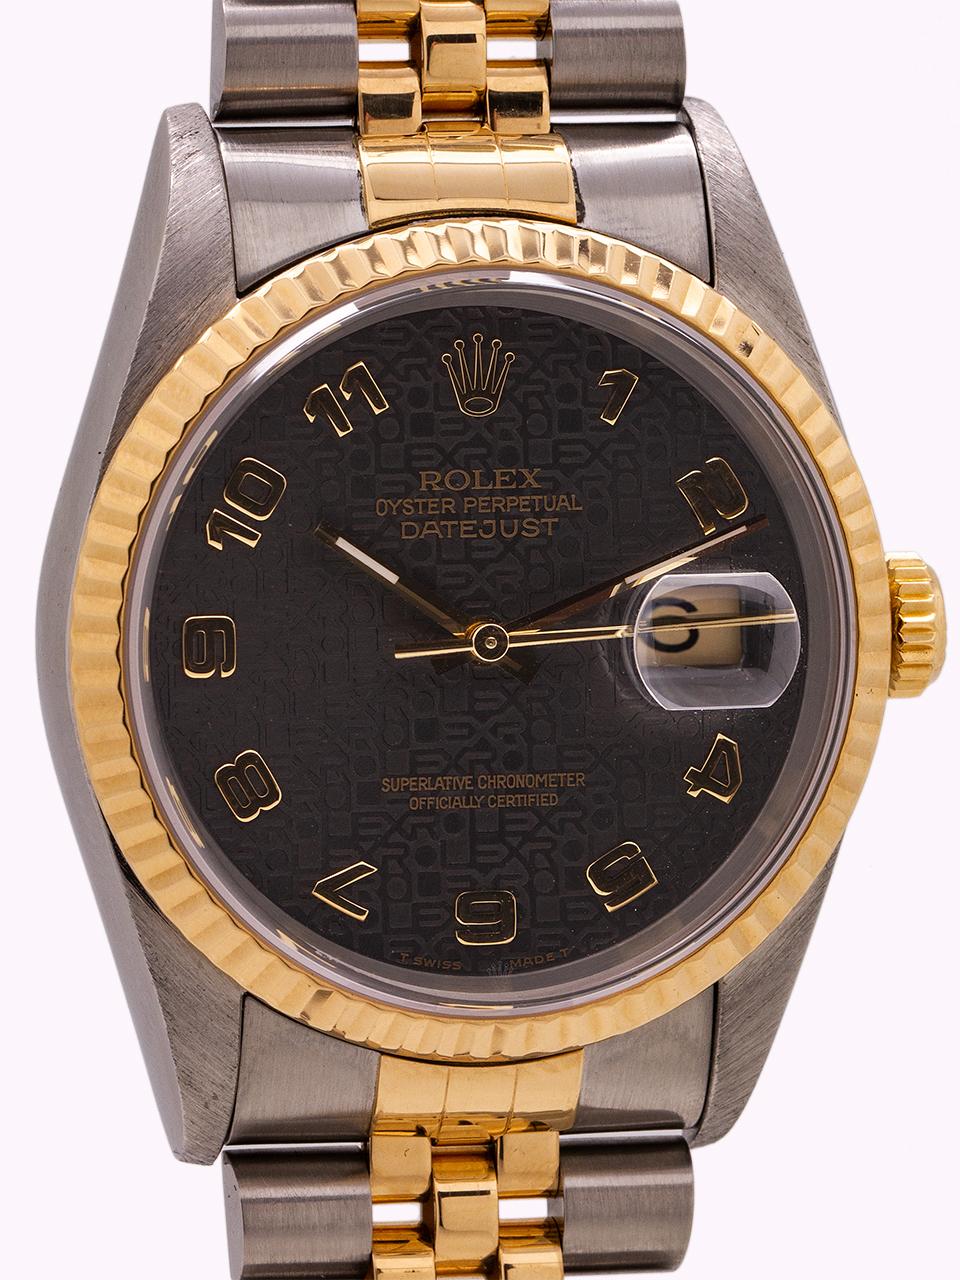 
Man’s Rolex Datejust ref 16233 stainless steel and 18K gold. S serial# circa 1993. Featuring 36mm diameter case with 18K YG fluted bezel, sapphire crystal, and very scarce original Jubilee dial with gray metallic background and bold gold Arabic